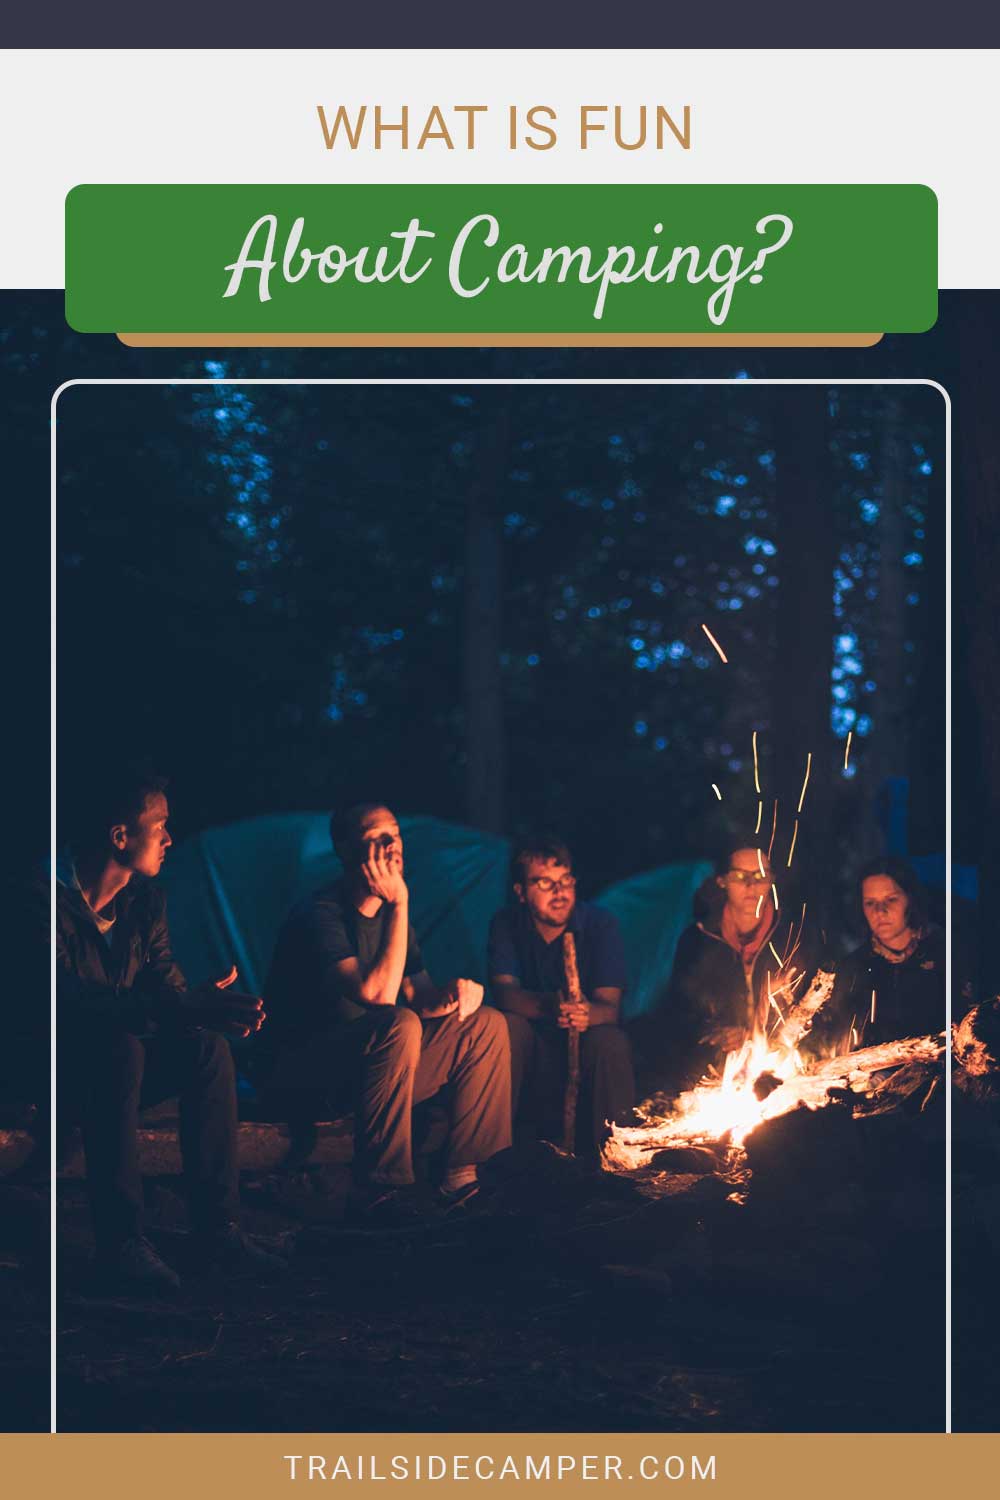 What Is Fun About Camping?